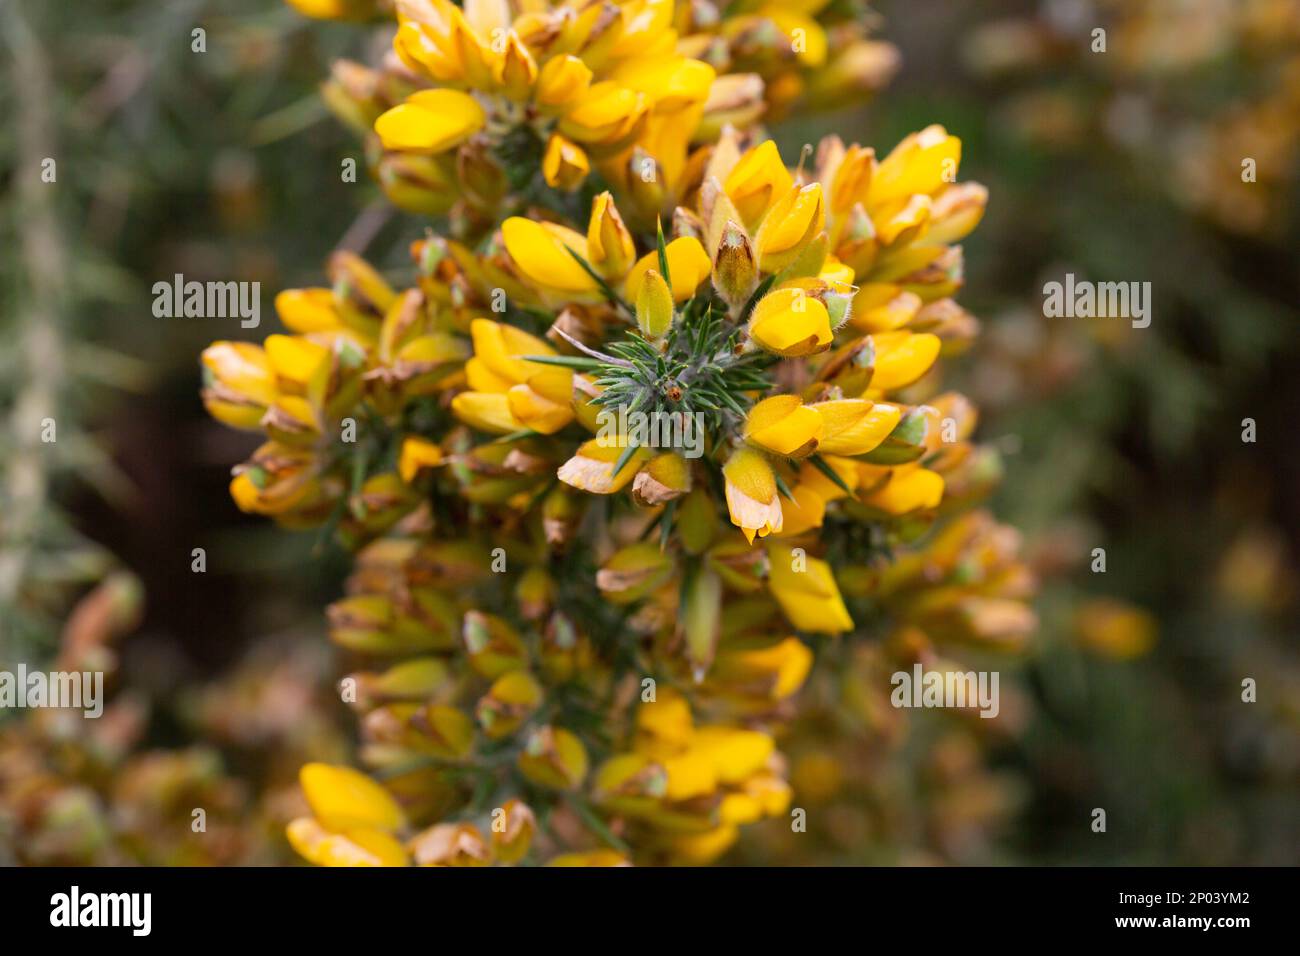 Ulex europaeus. Branches of the gorse bush with its yellow inflorescences, selective focus Stock Photo